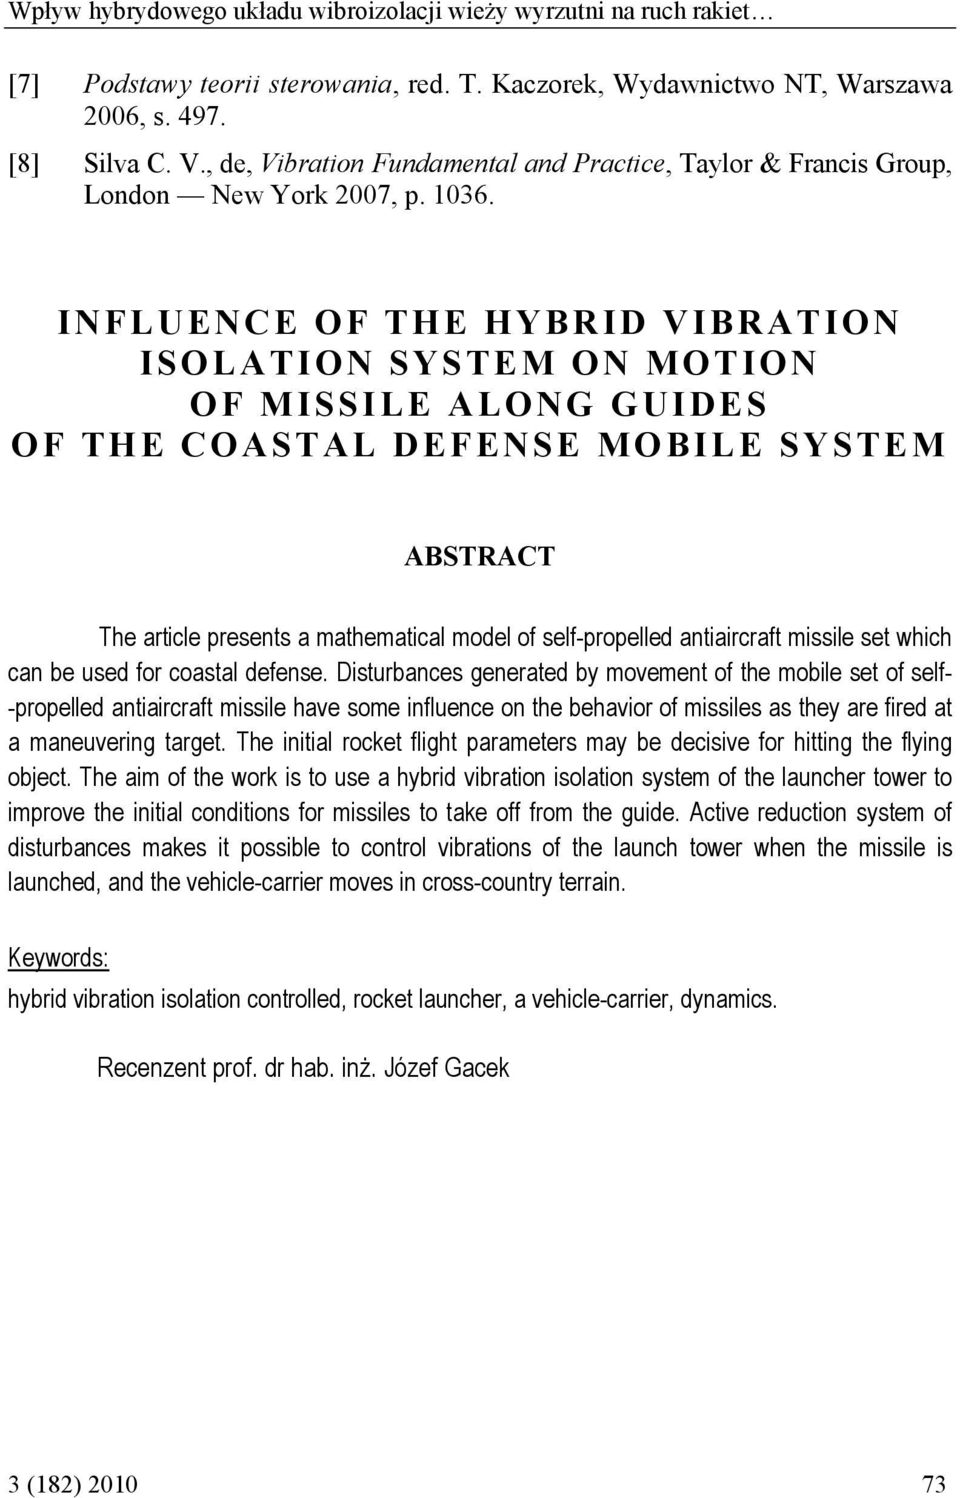 INFLUENCE OF THE HYBRID VIBRATION ISOLATION SYSTEM ON MOTION OF MISSILE ALONG GUIDES OF THE COASTAL DEFENSE MOBILE SYSTEM ABSTRACT The article presents a mathematical model of self-propelled